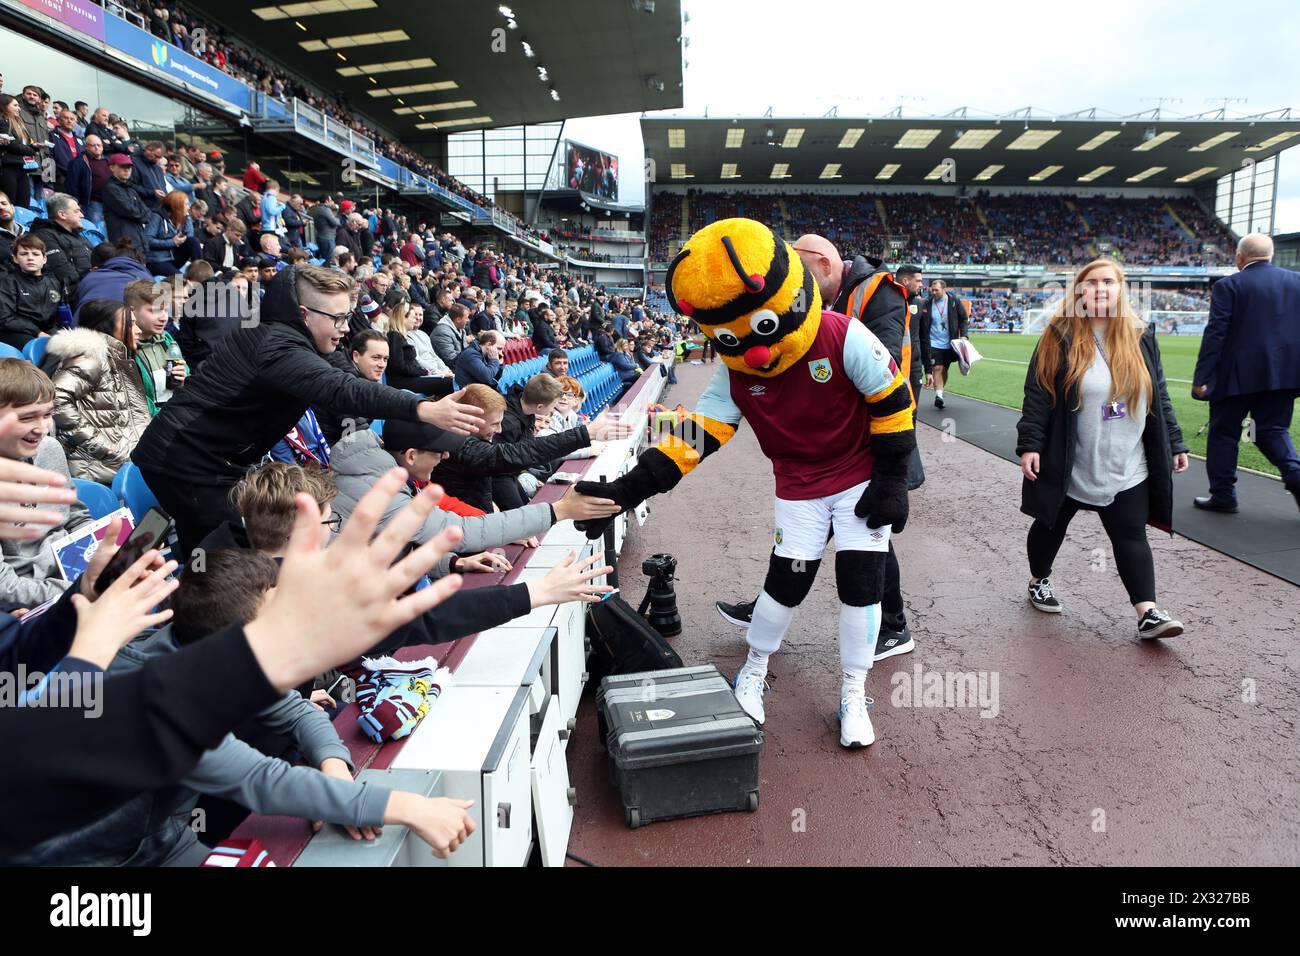 The Burnley mascot high-fives young fans before kick-off. Burnley Football club who have been in the Premiership league since 2015/16. A club with rel Stock Photo